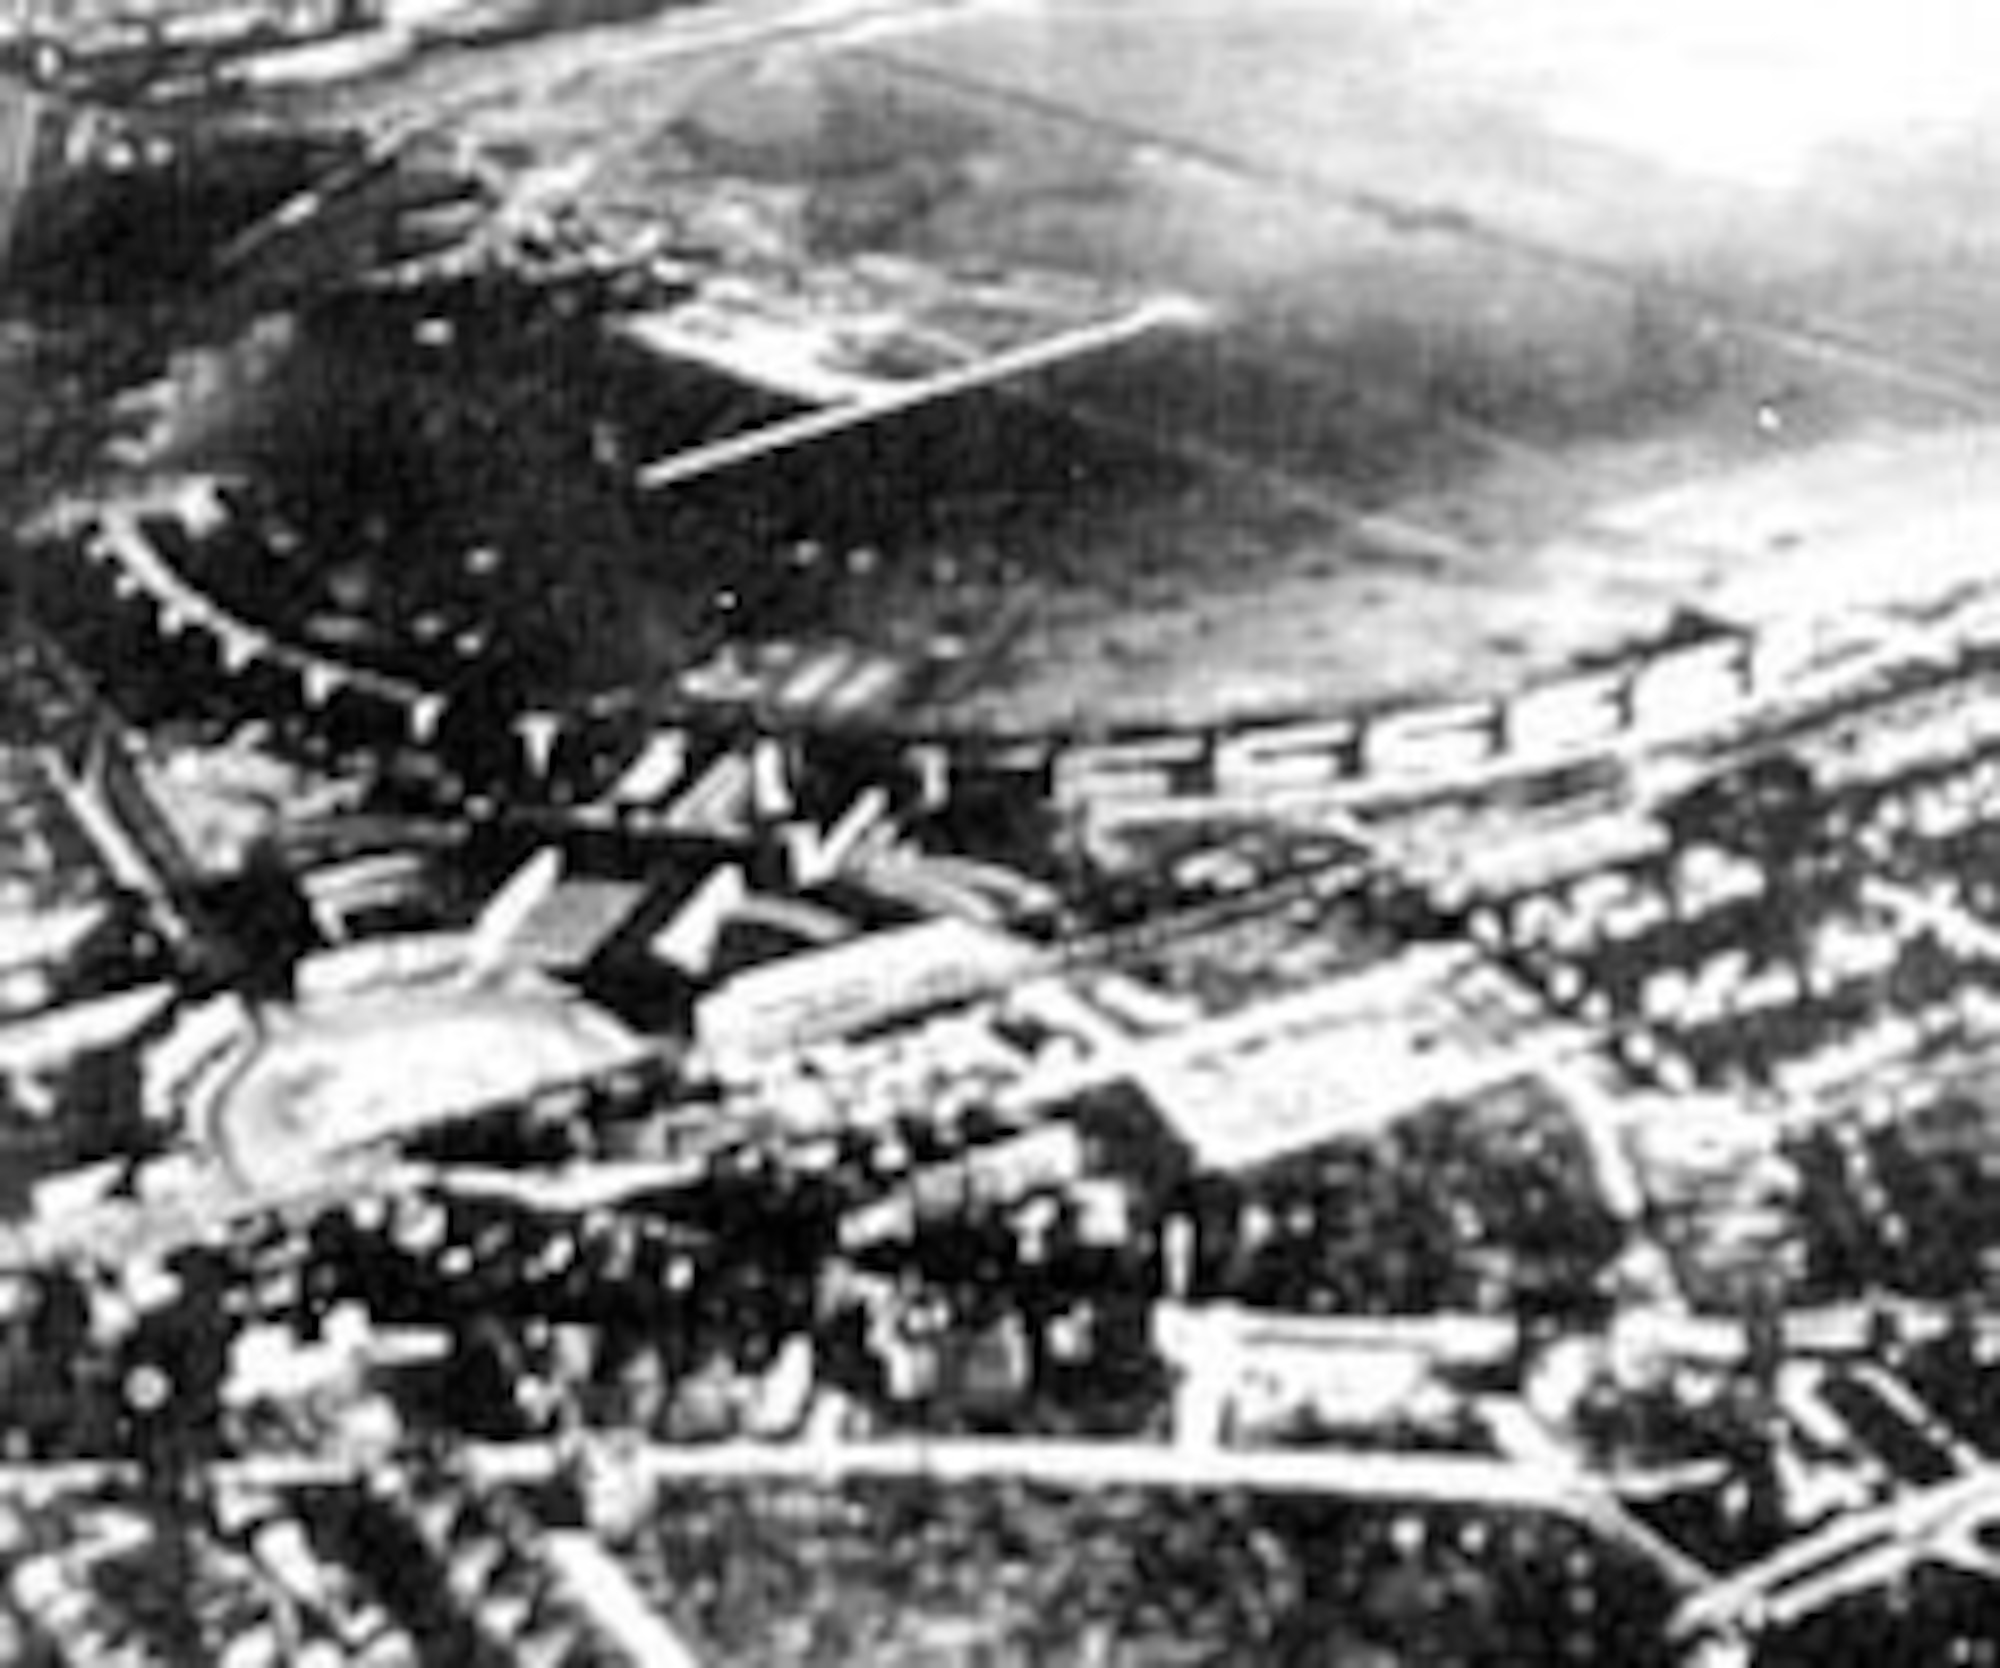 Airlift aircraft used three airfields within Berlin: Tempelhof (above) in the U.S. sector, Gatow in the British sector and Tegel, which was built in the French sector in only 60 days using volunteer German men and women laborers. (U.S. Air Force photo)